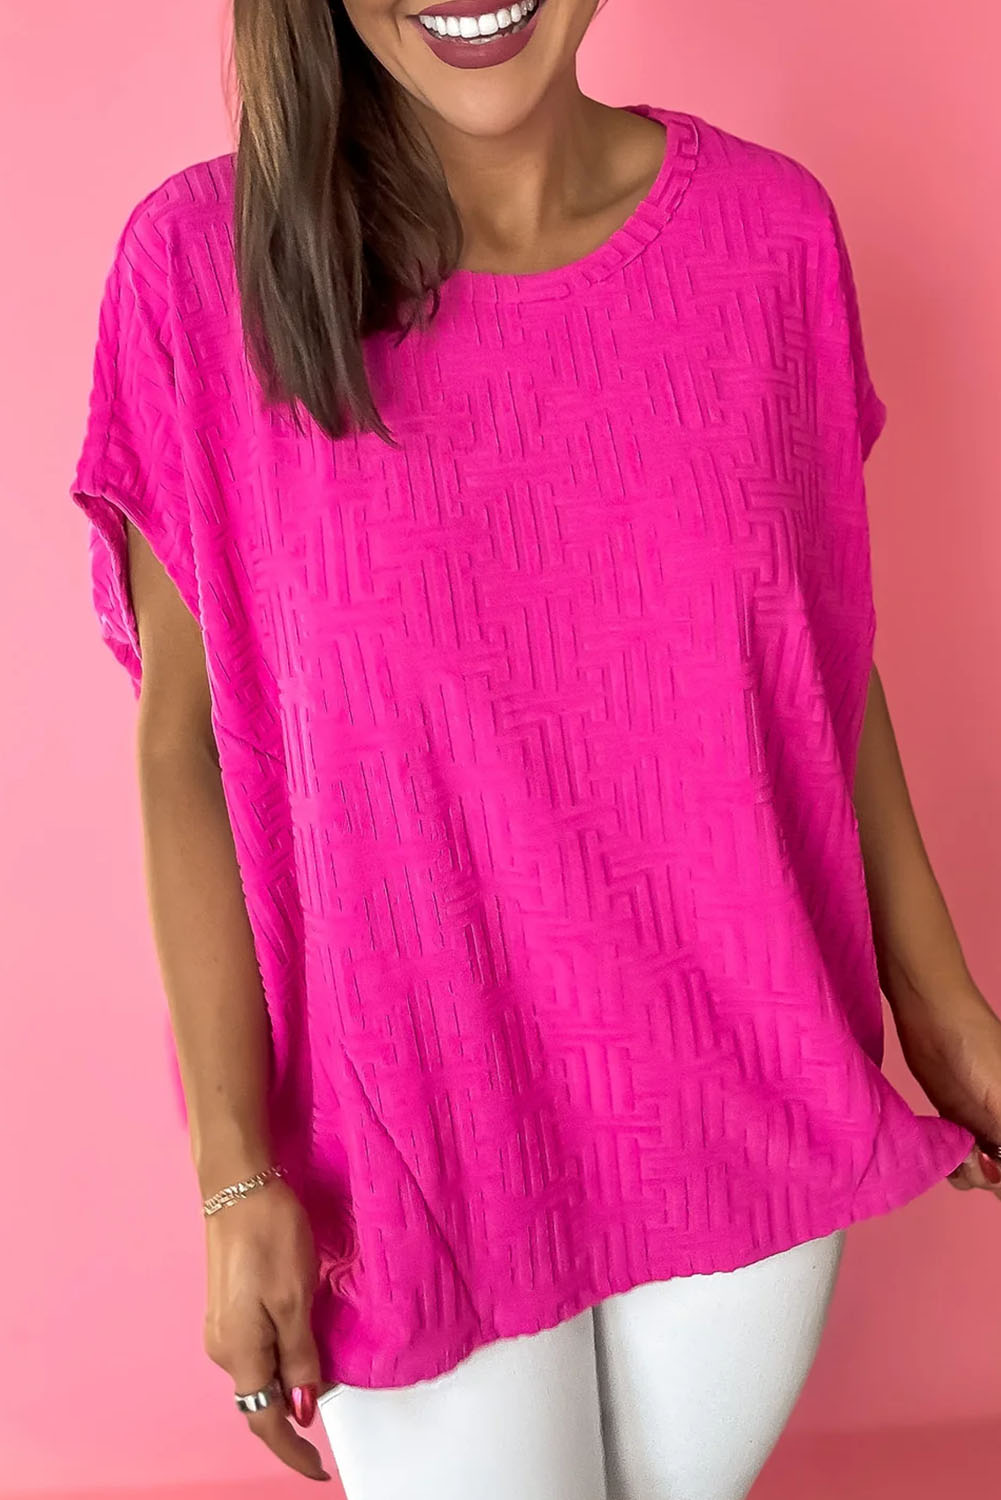 Shewin Wholesale Apparel Rose Red Textured Oversized Dolman T SHIRT